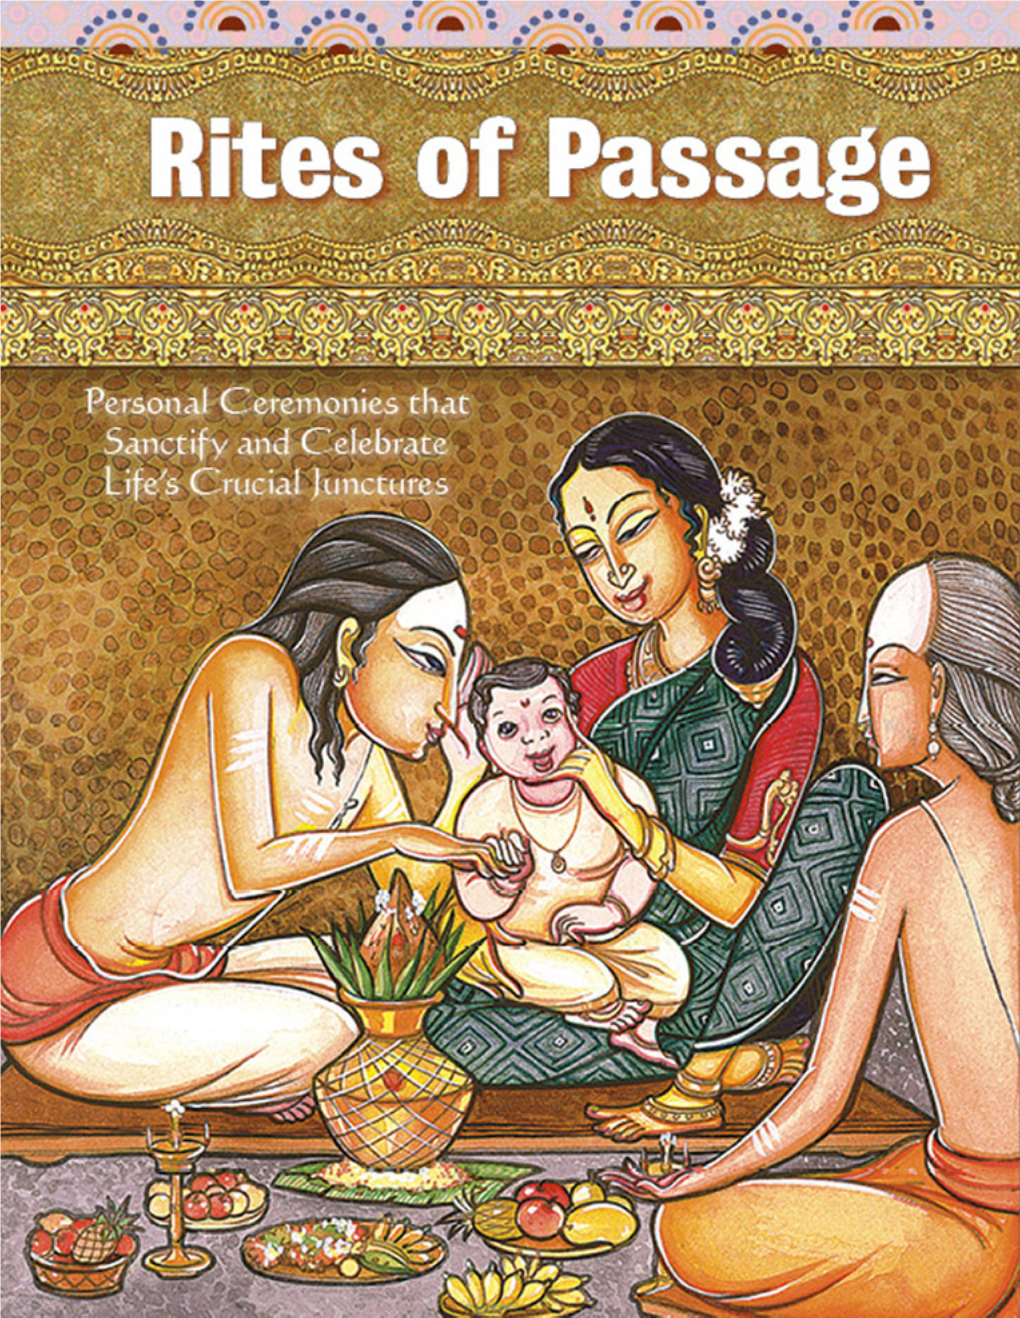 Rites of Passage, a Temple Or Home Ceremony Deeply Influences the Soul and Directs Life Along the Path of Dharma